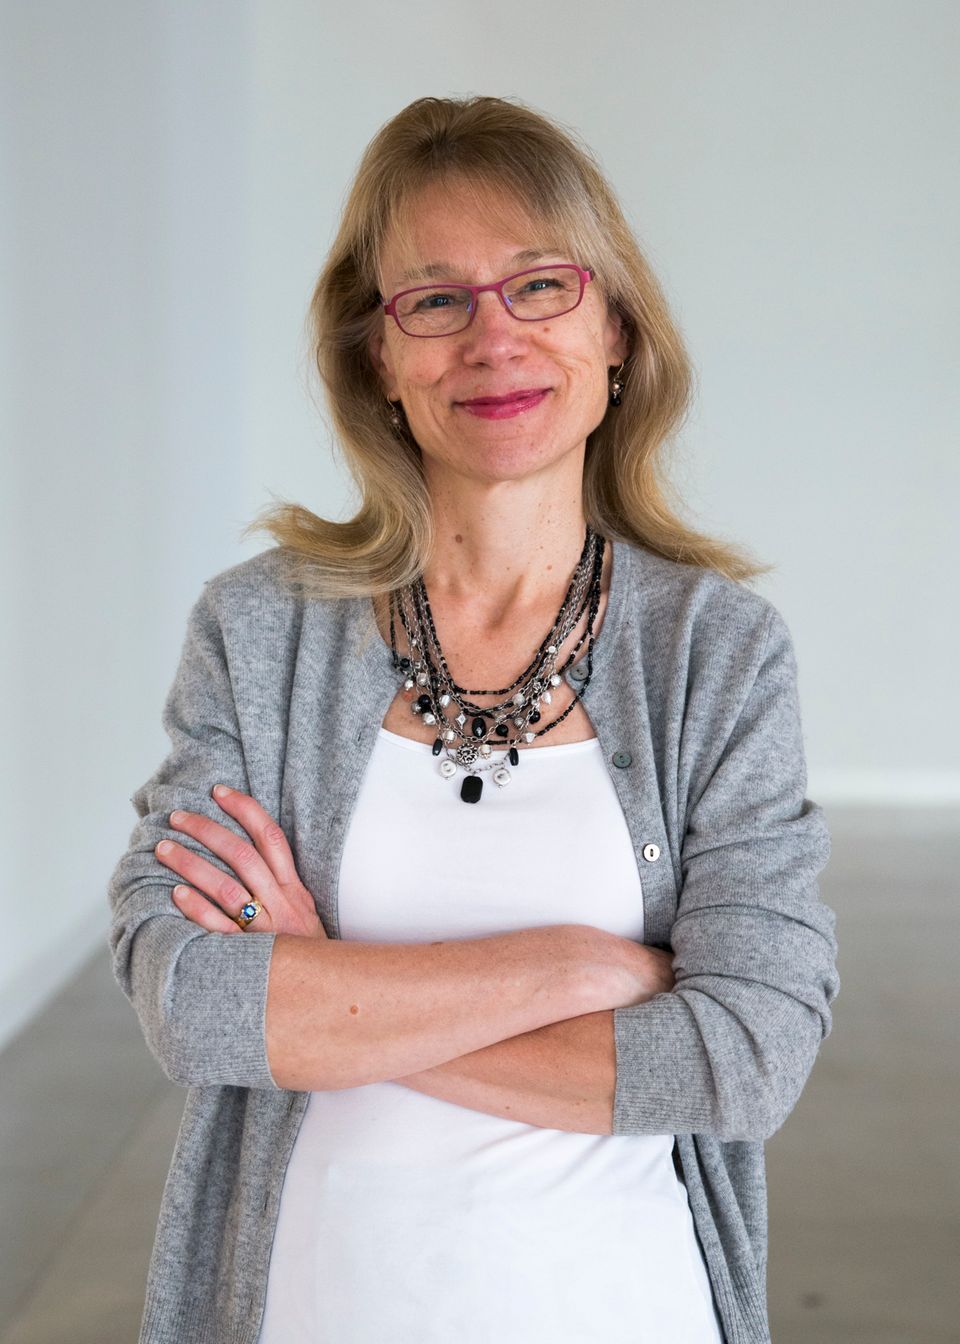 This is an image of author Susan Rather